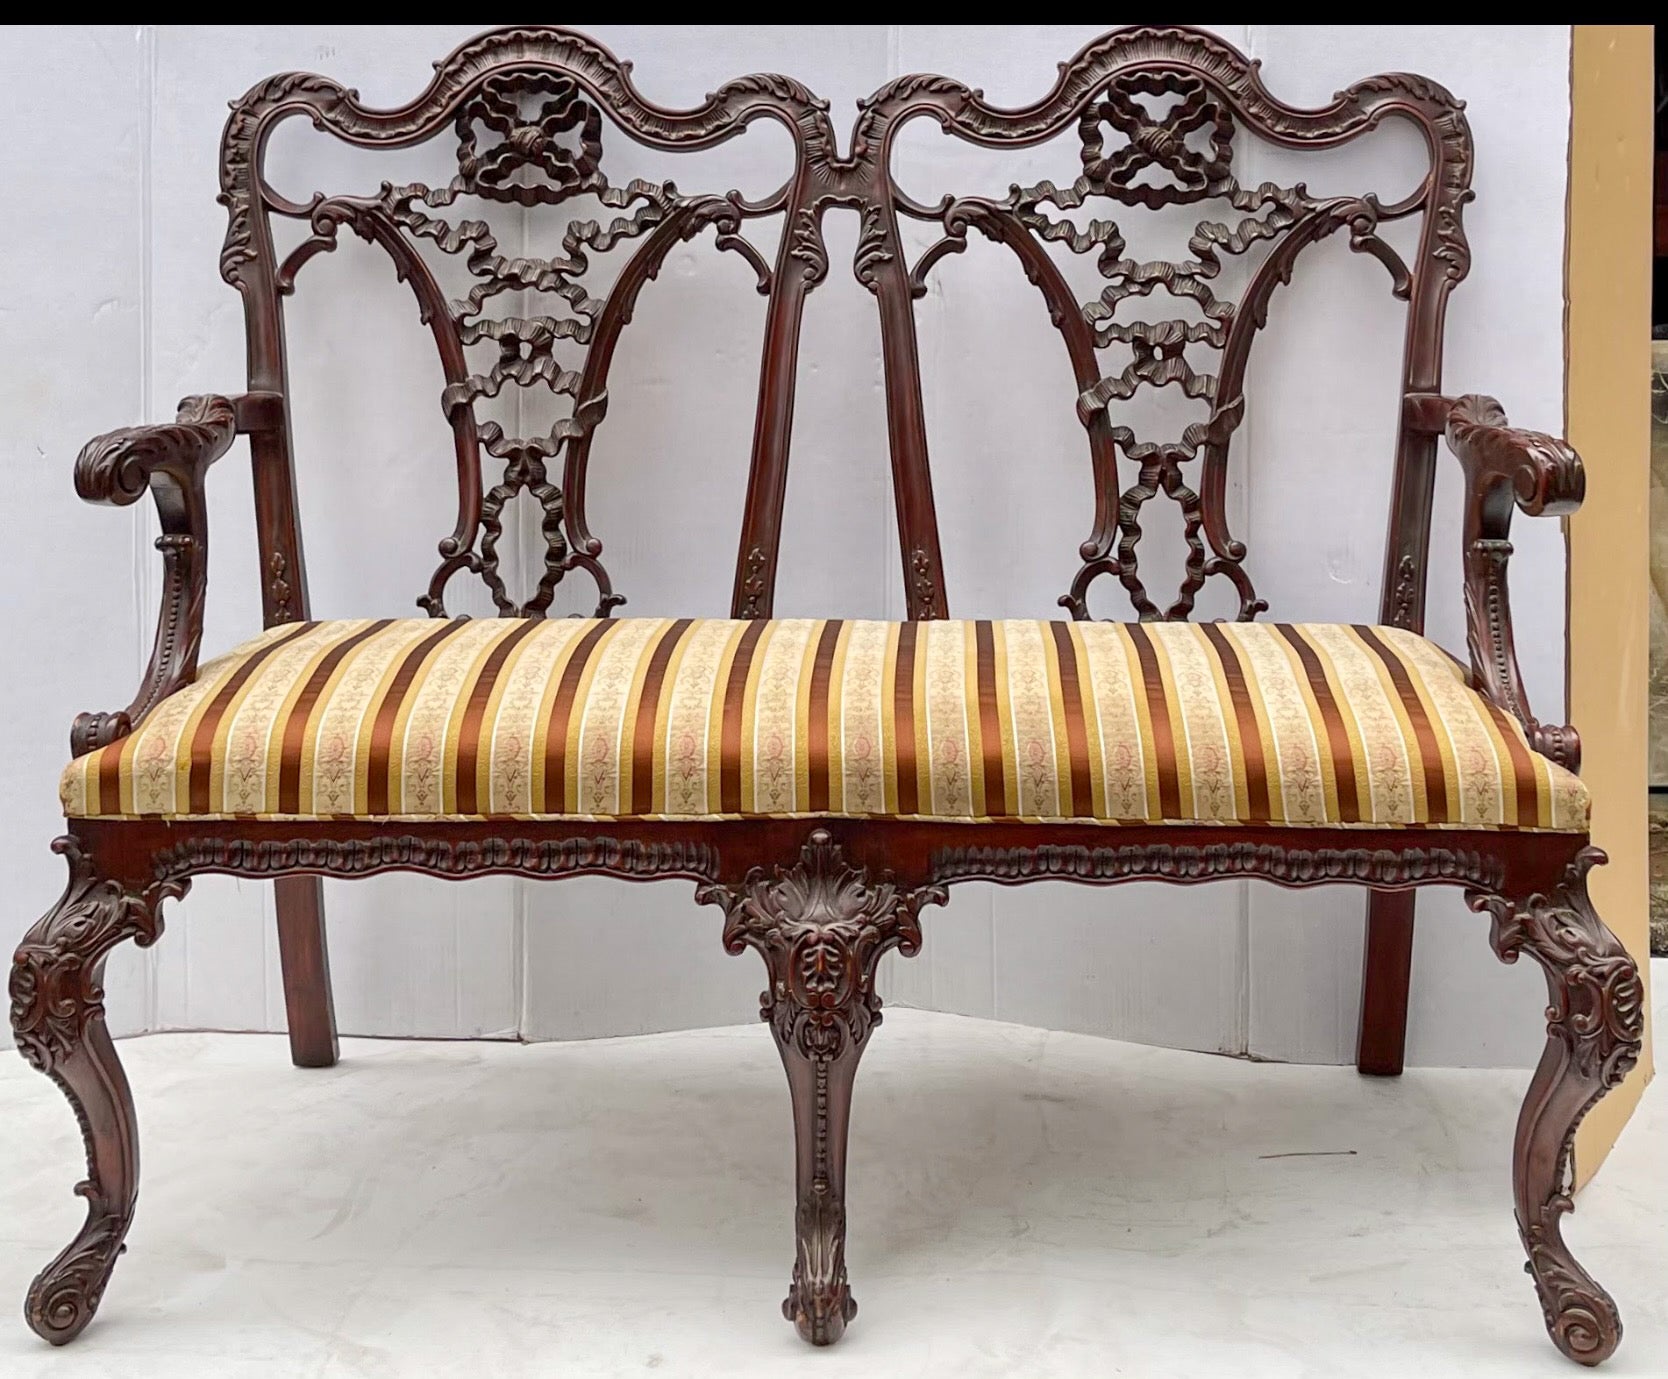 Such a beautiful back! This is an early English Chinese Chippendale style mahogany settee. The carving is amazing! The vintage striped upholstery is in very good condition. It is unmarked. 
My shipping is for the Continental US only.